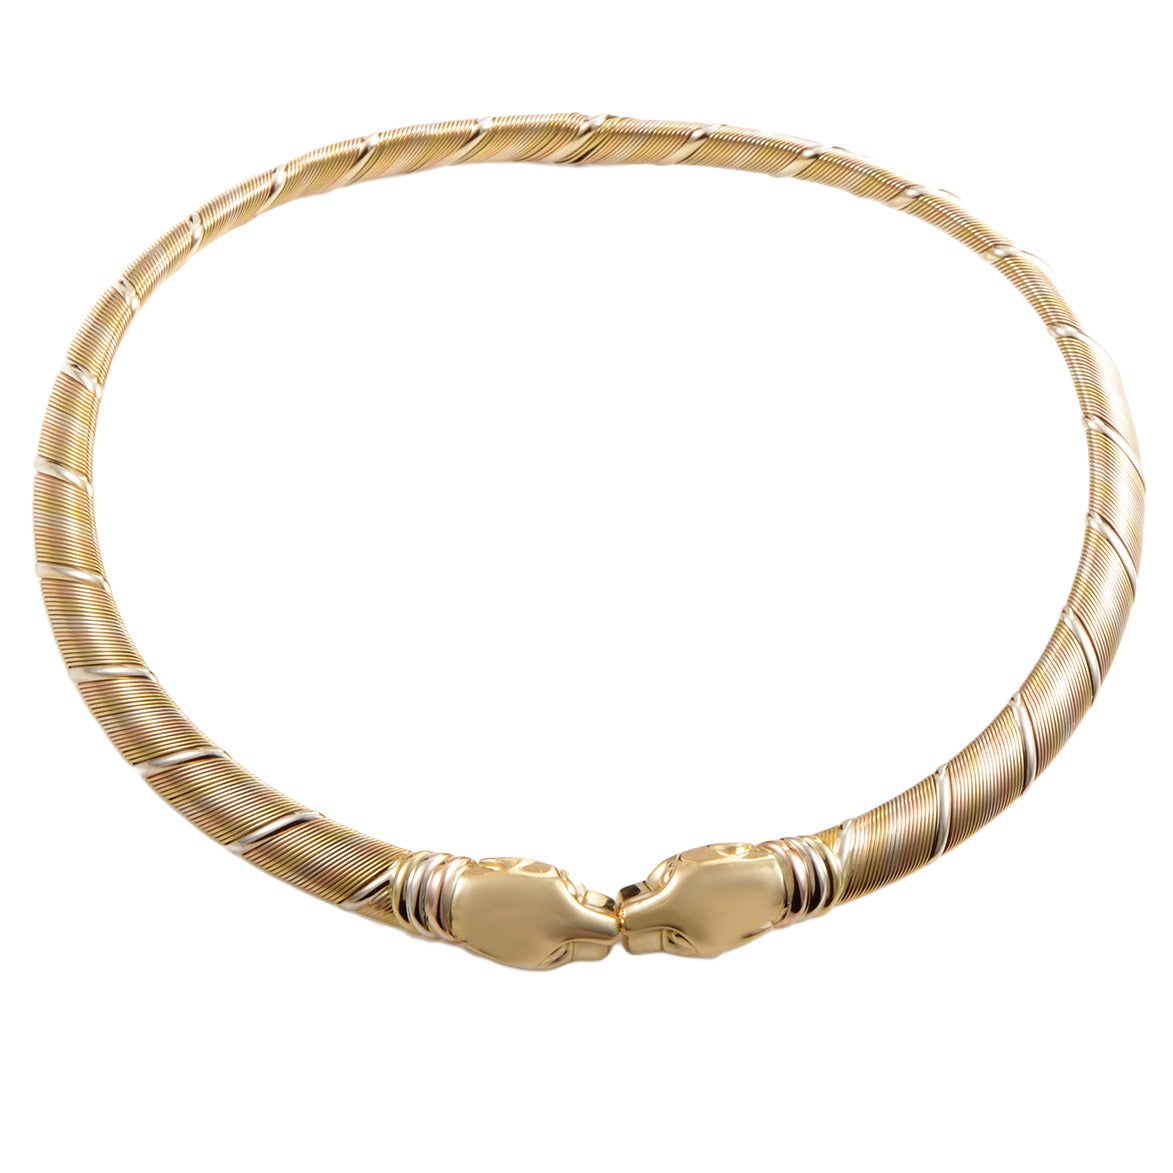 Cartier Panthere Tricolor Gold Choker Necklace